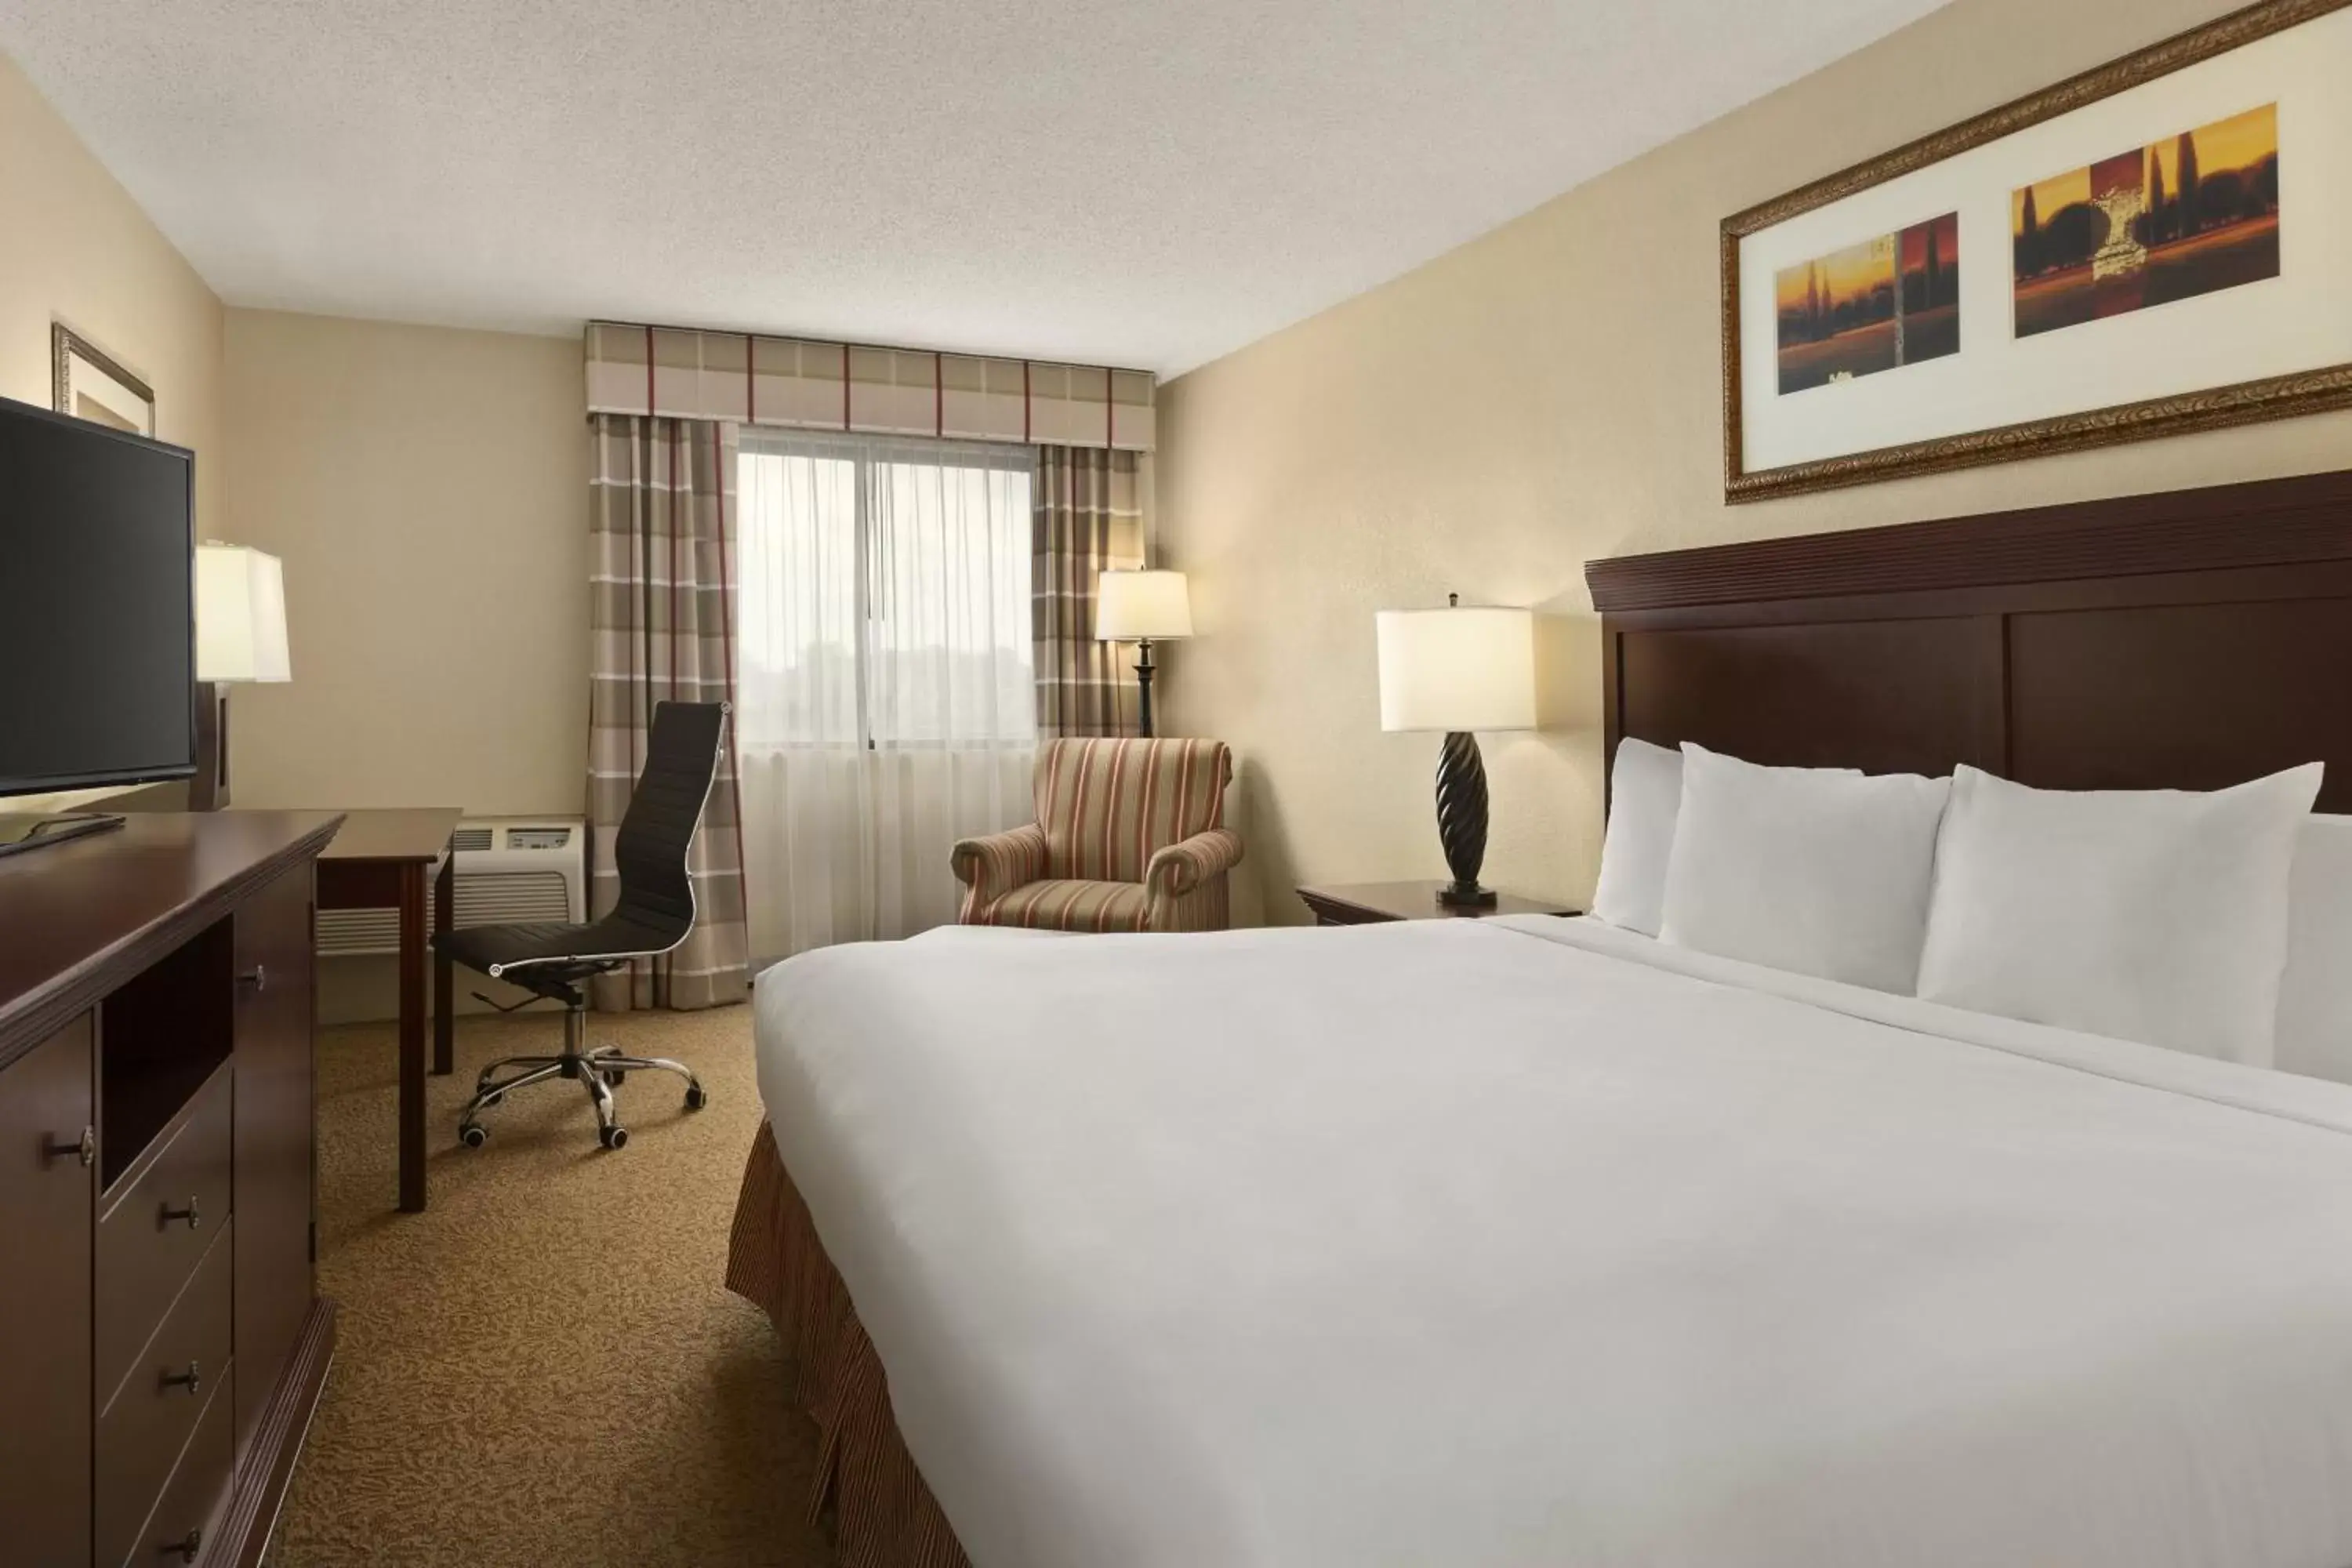 King Room - Disability Access/Non-Smoking in Country Inn & Suites by Radisson, Atlanta Airport South, GA